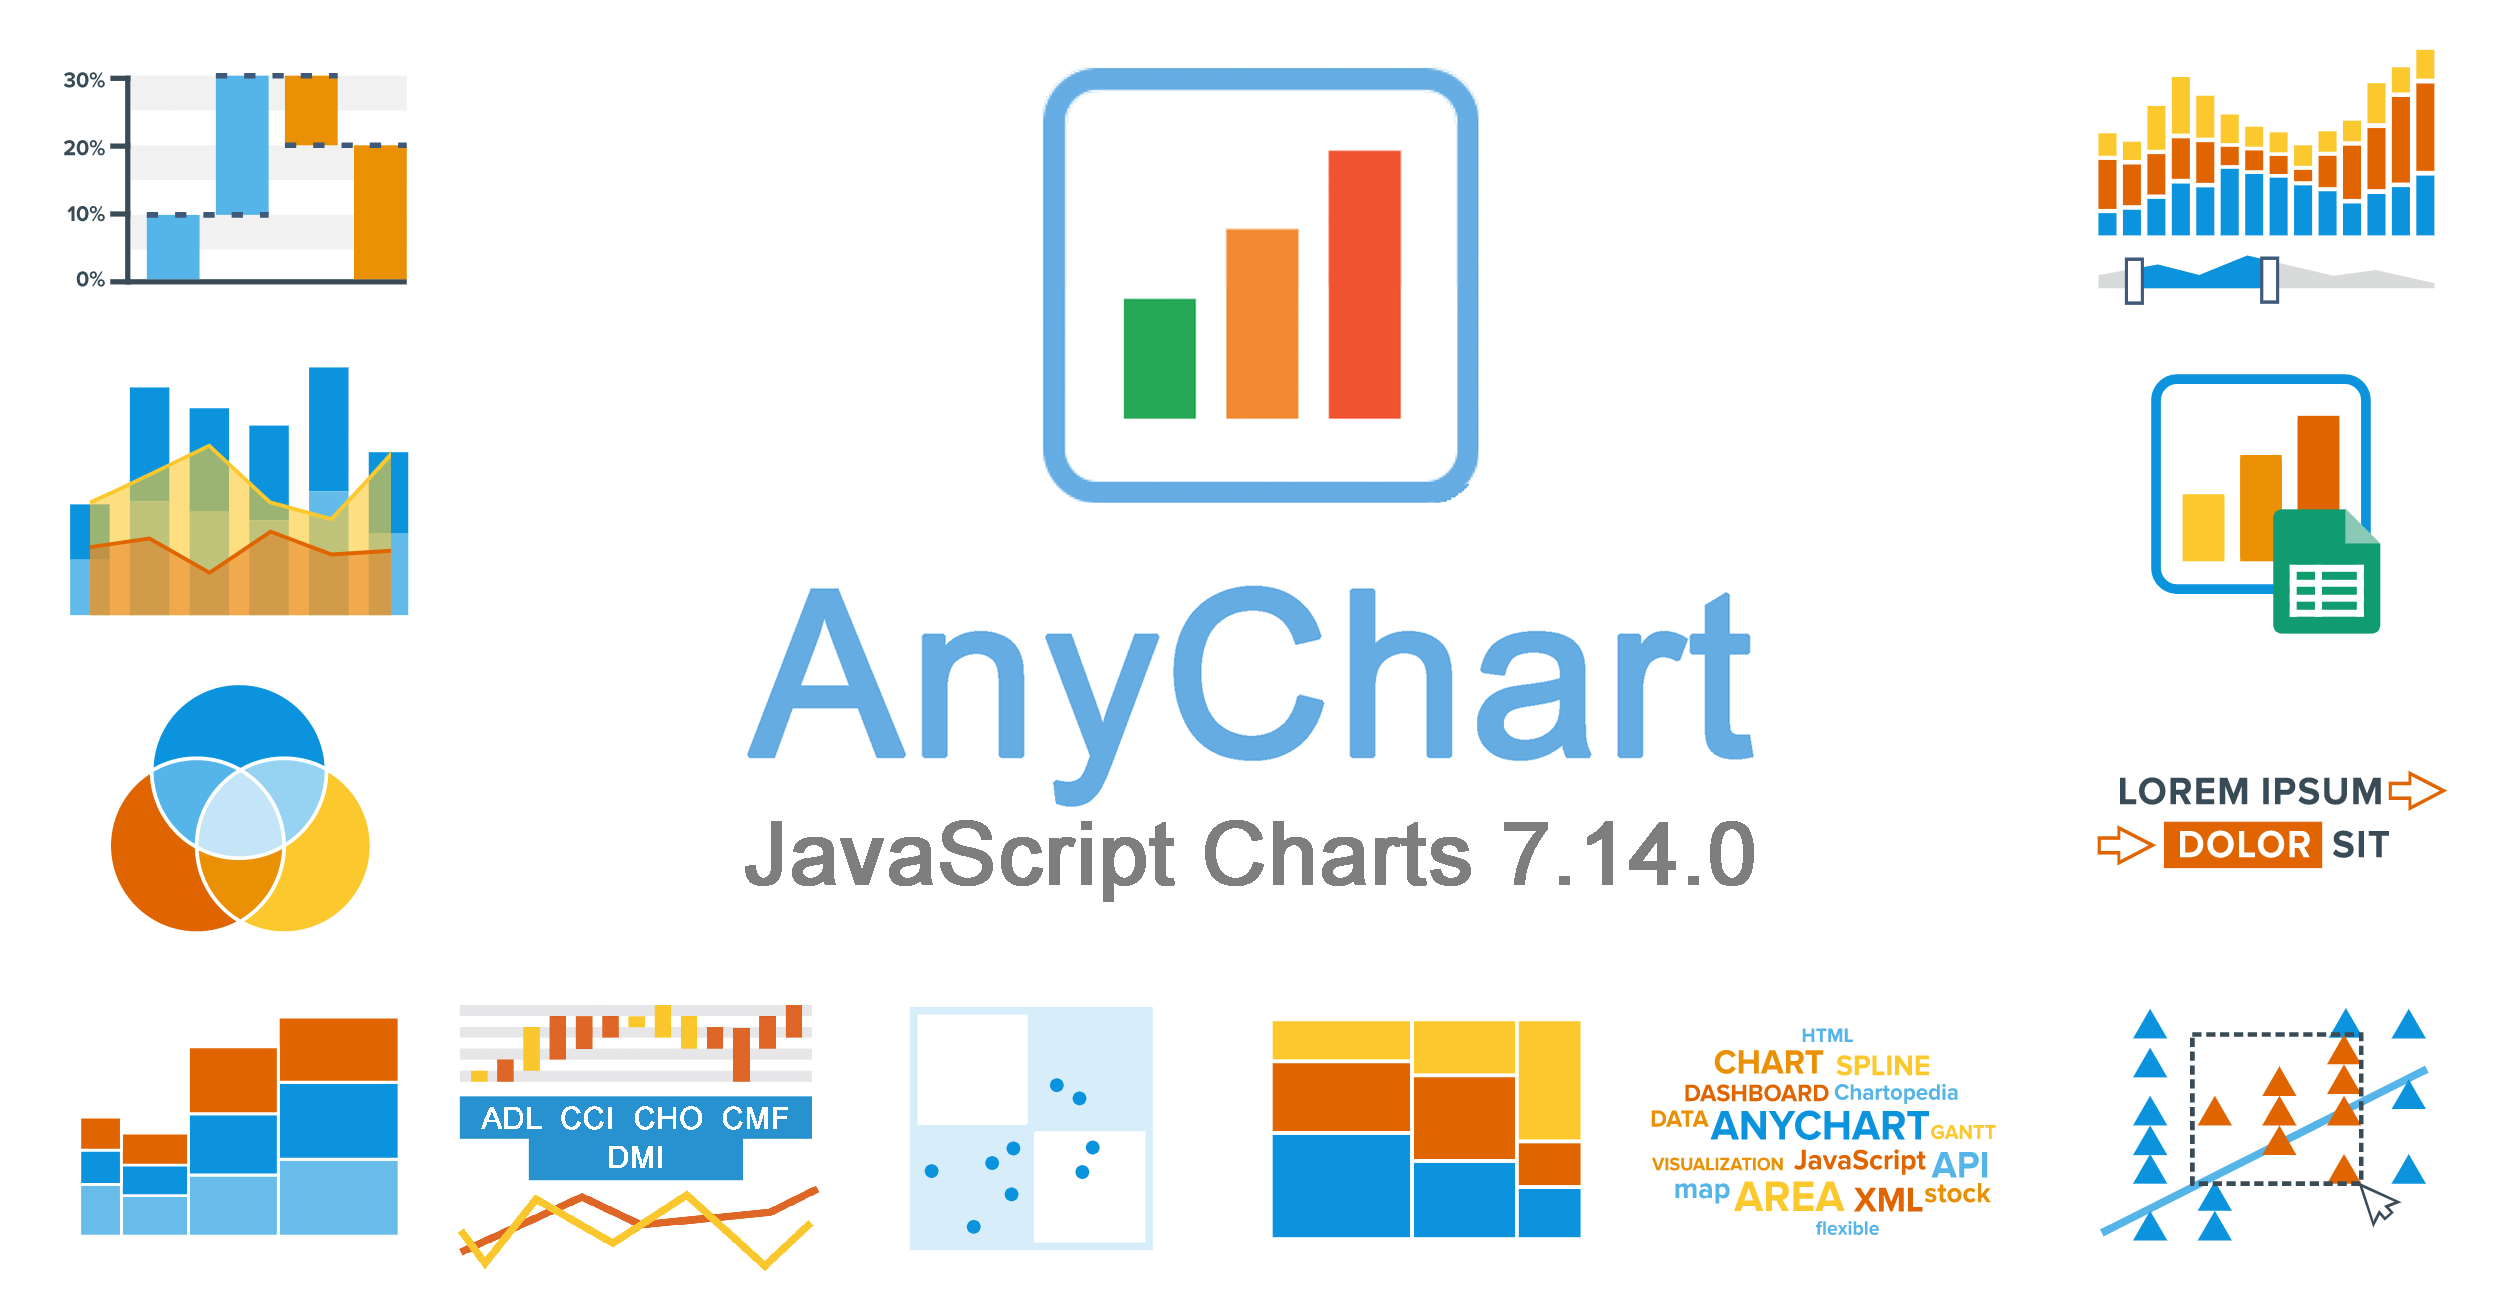 JavaScript Charting Libraries of AnyChart JS Charts 7.14.0 Just Released